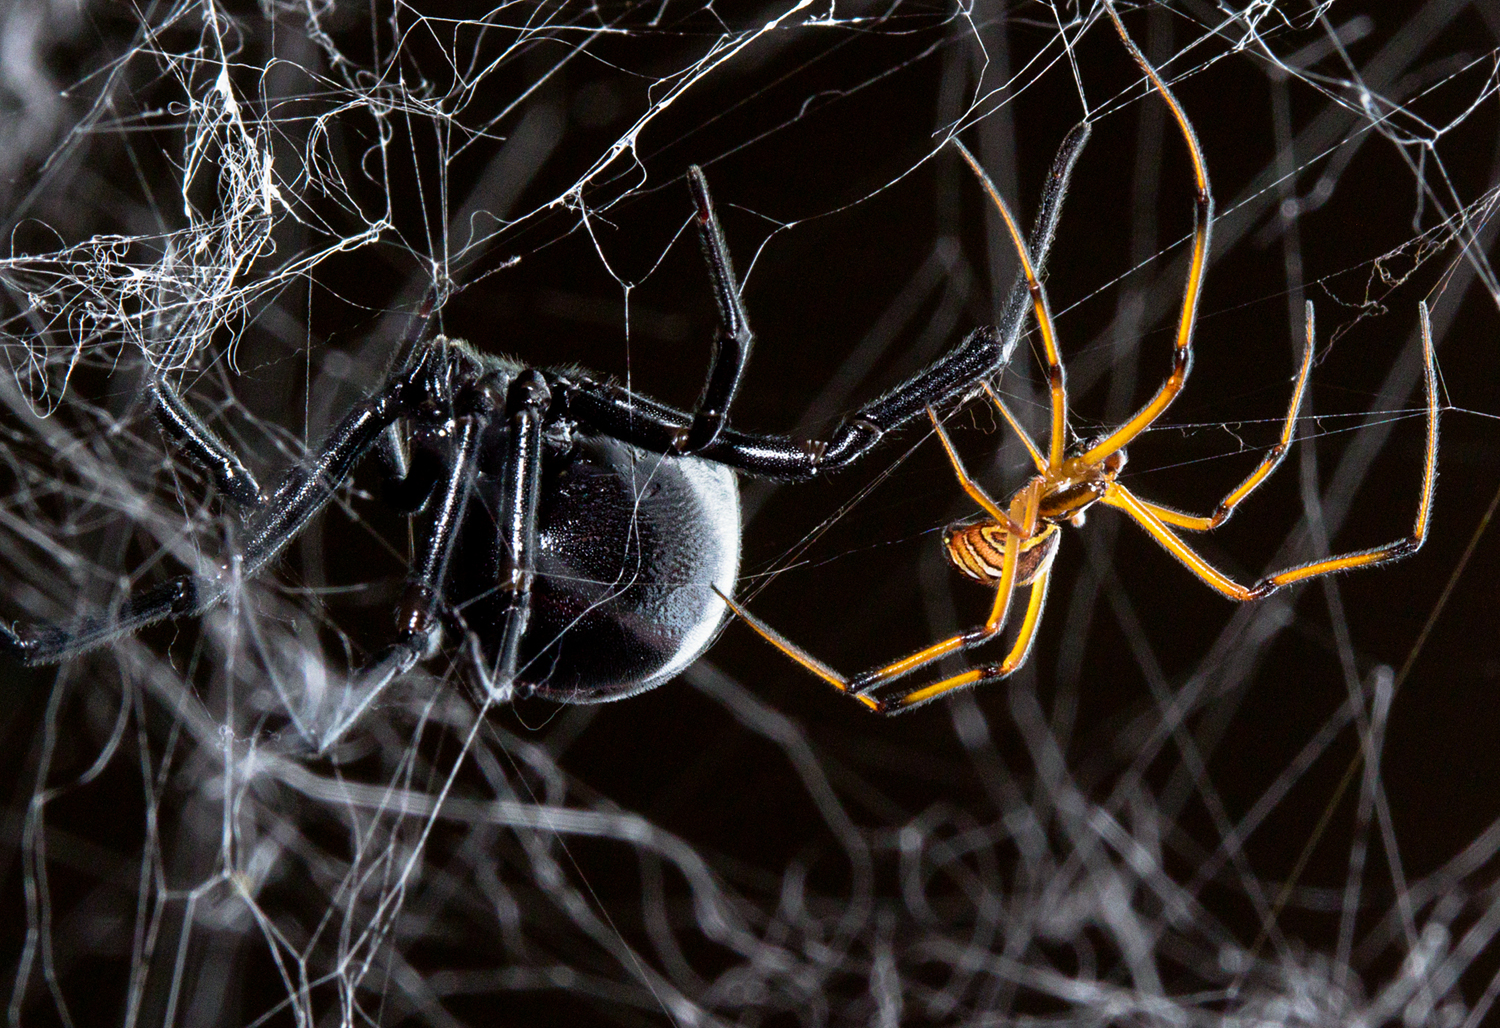 Spider Stories That'll Stick With You - Science Friday